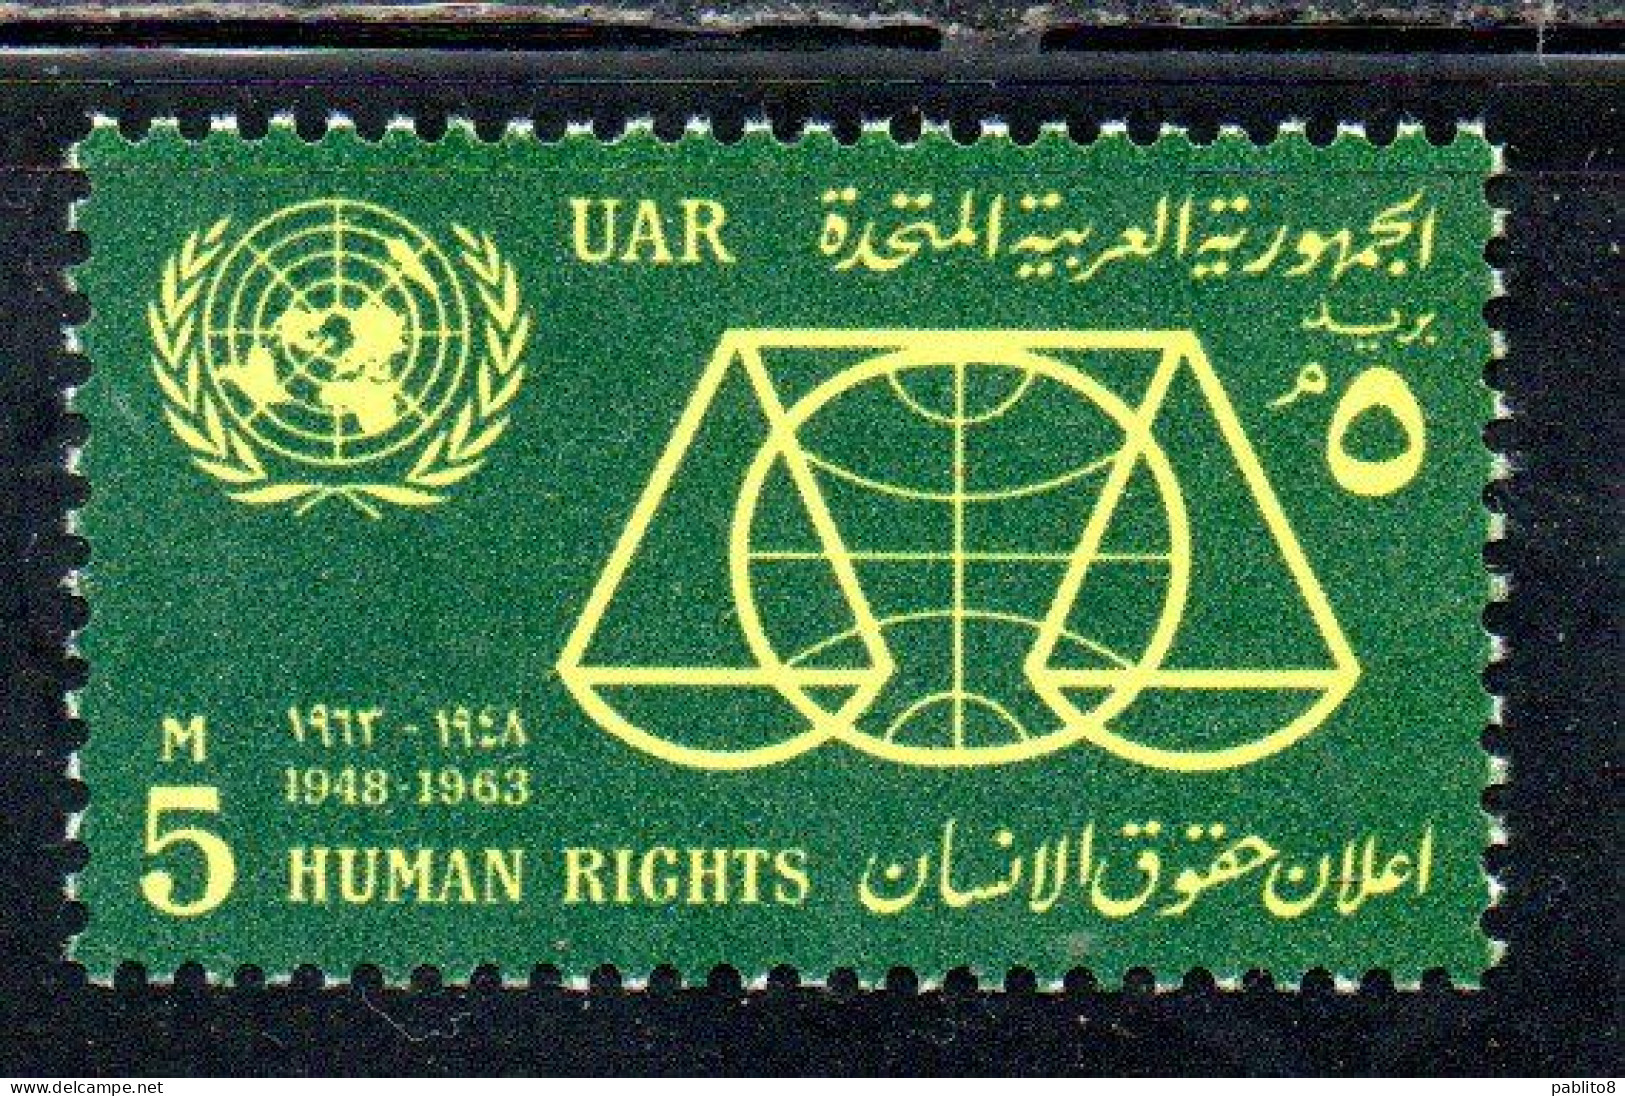 UAR EGYPT EGITTO 1963 15th ANNIVERSARY OF THE UNIVERSAL DECLARATION OF HUMAN RIGHTS 5m MNH - Unused Stamps